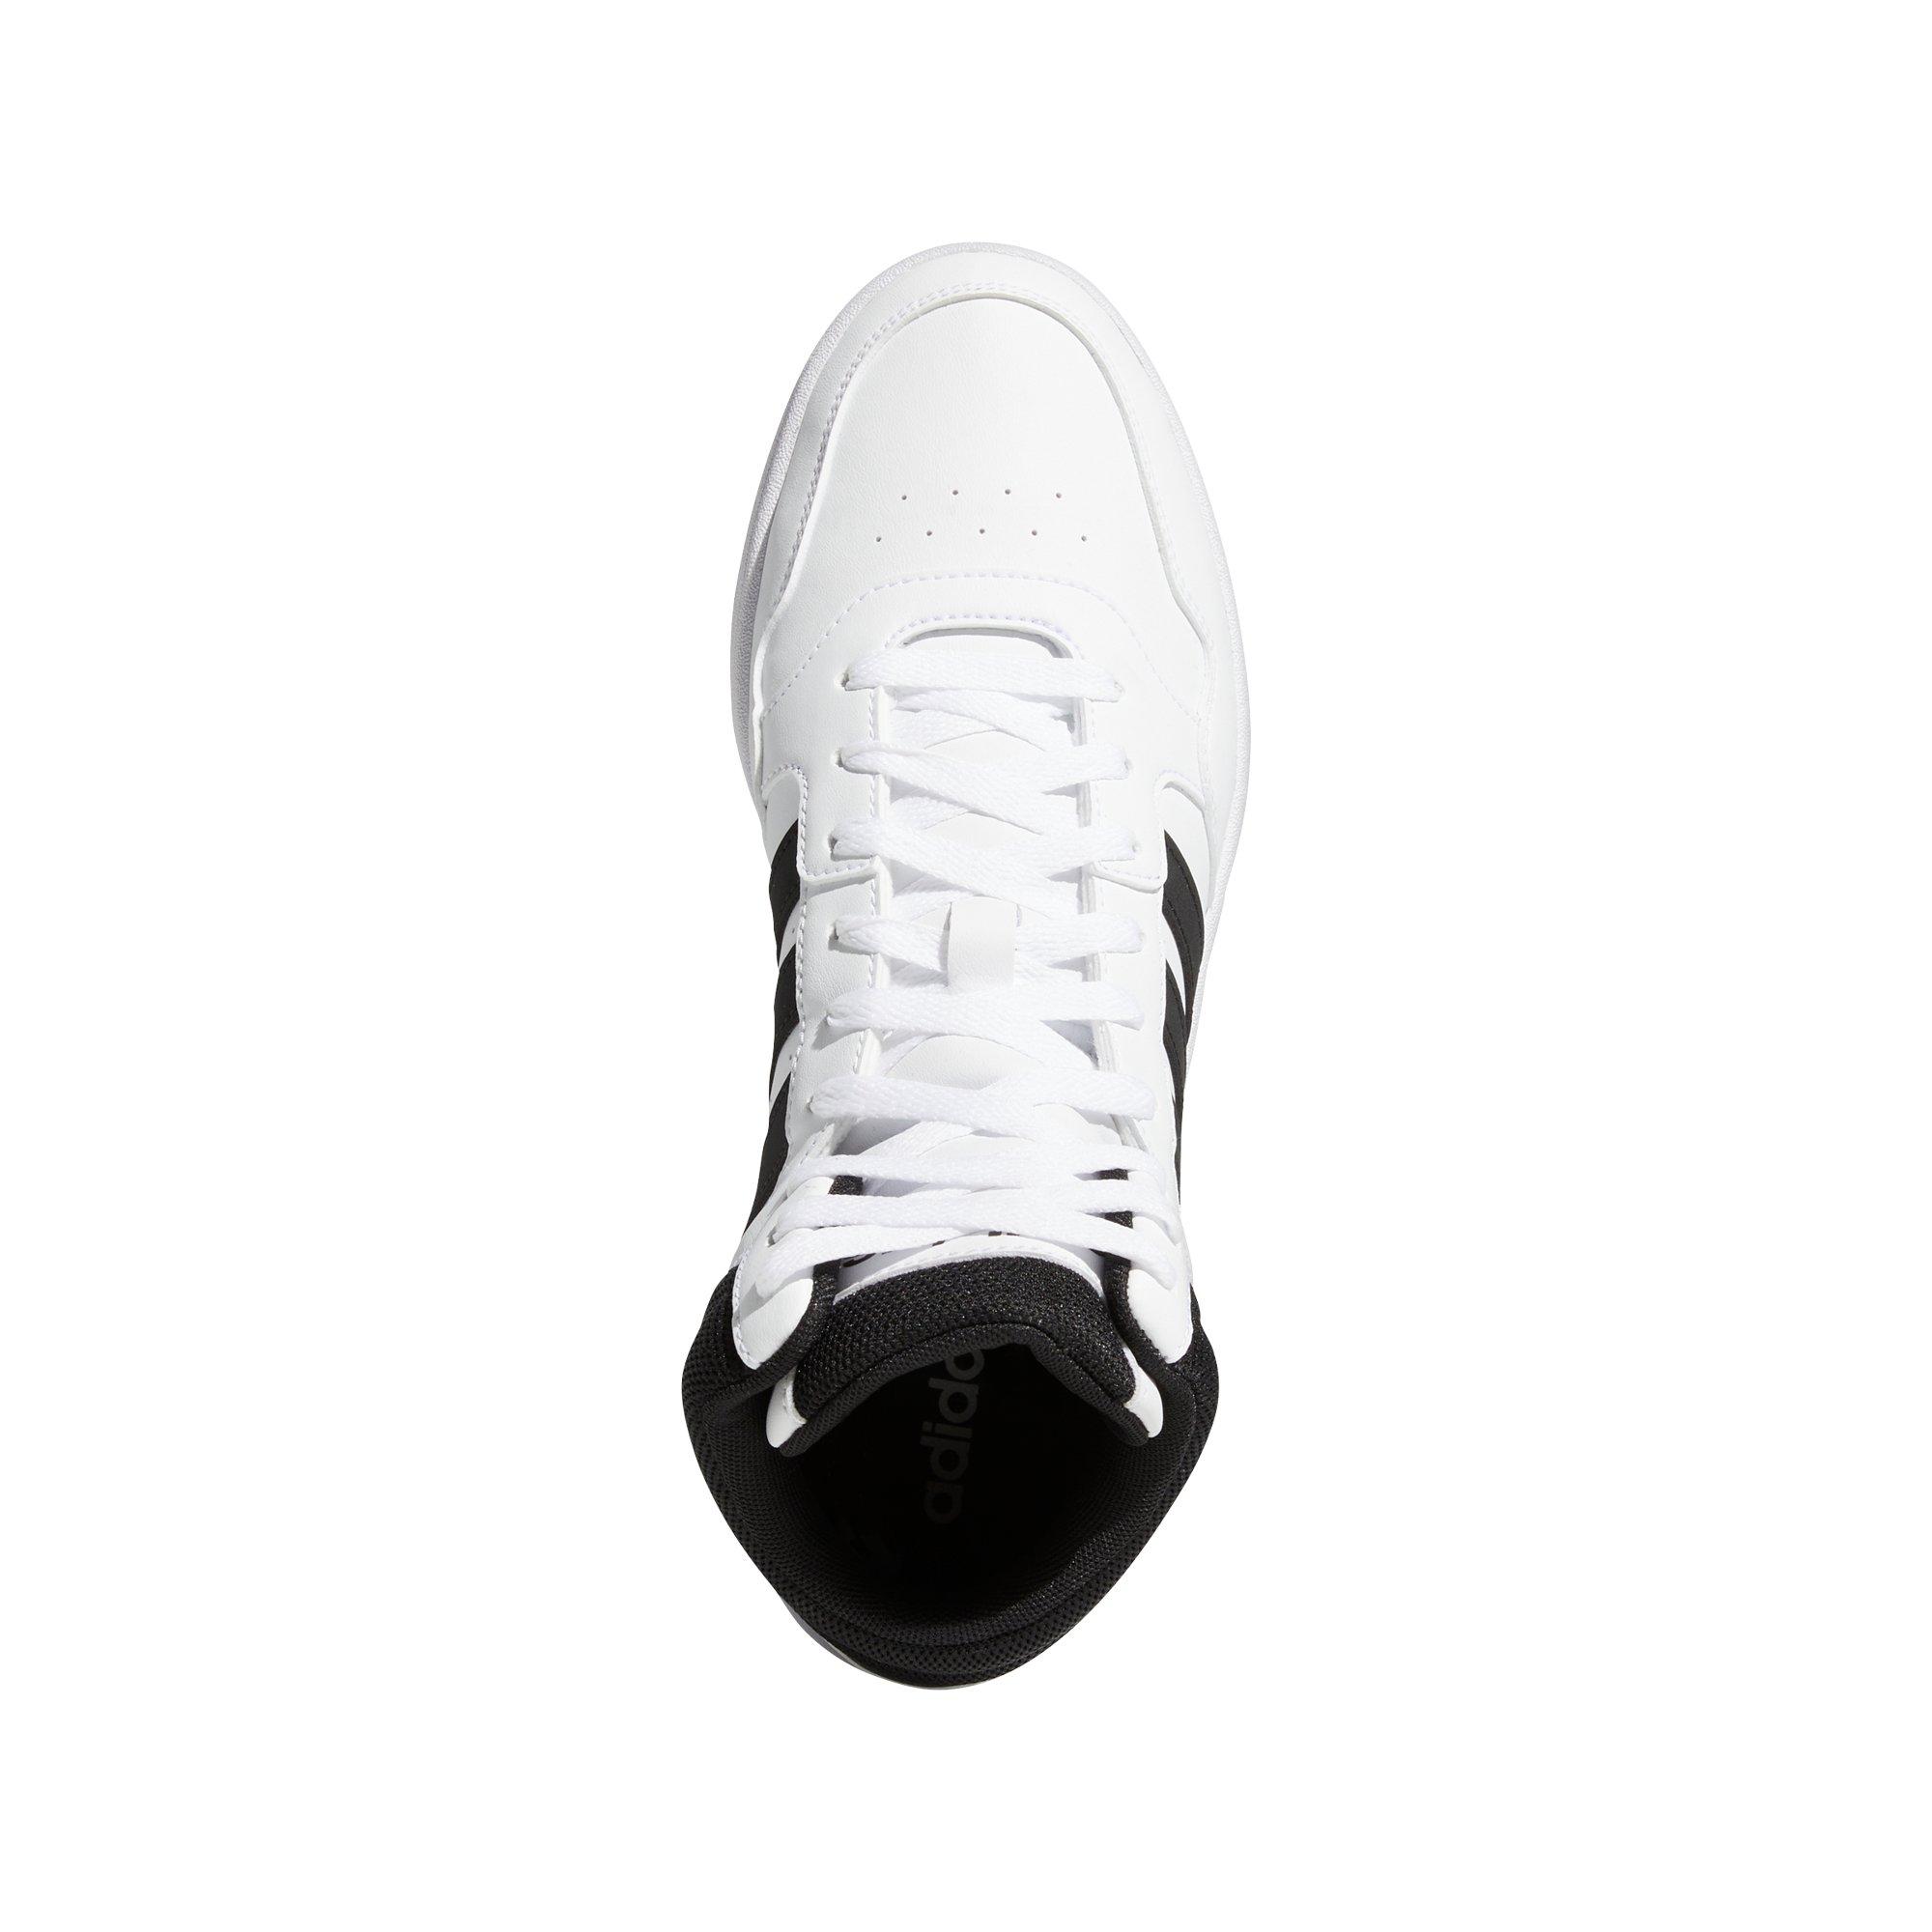 Men's Shoes - Hoops 3.0 Mid Lifestyle Basketball Classic Vintage Shoes -  White